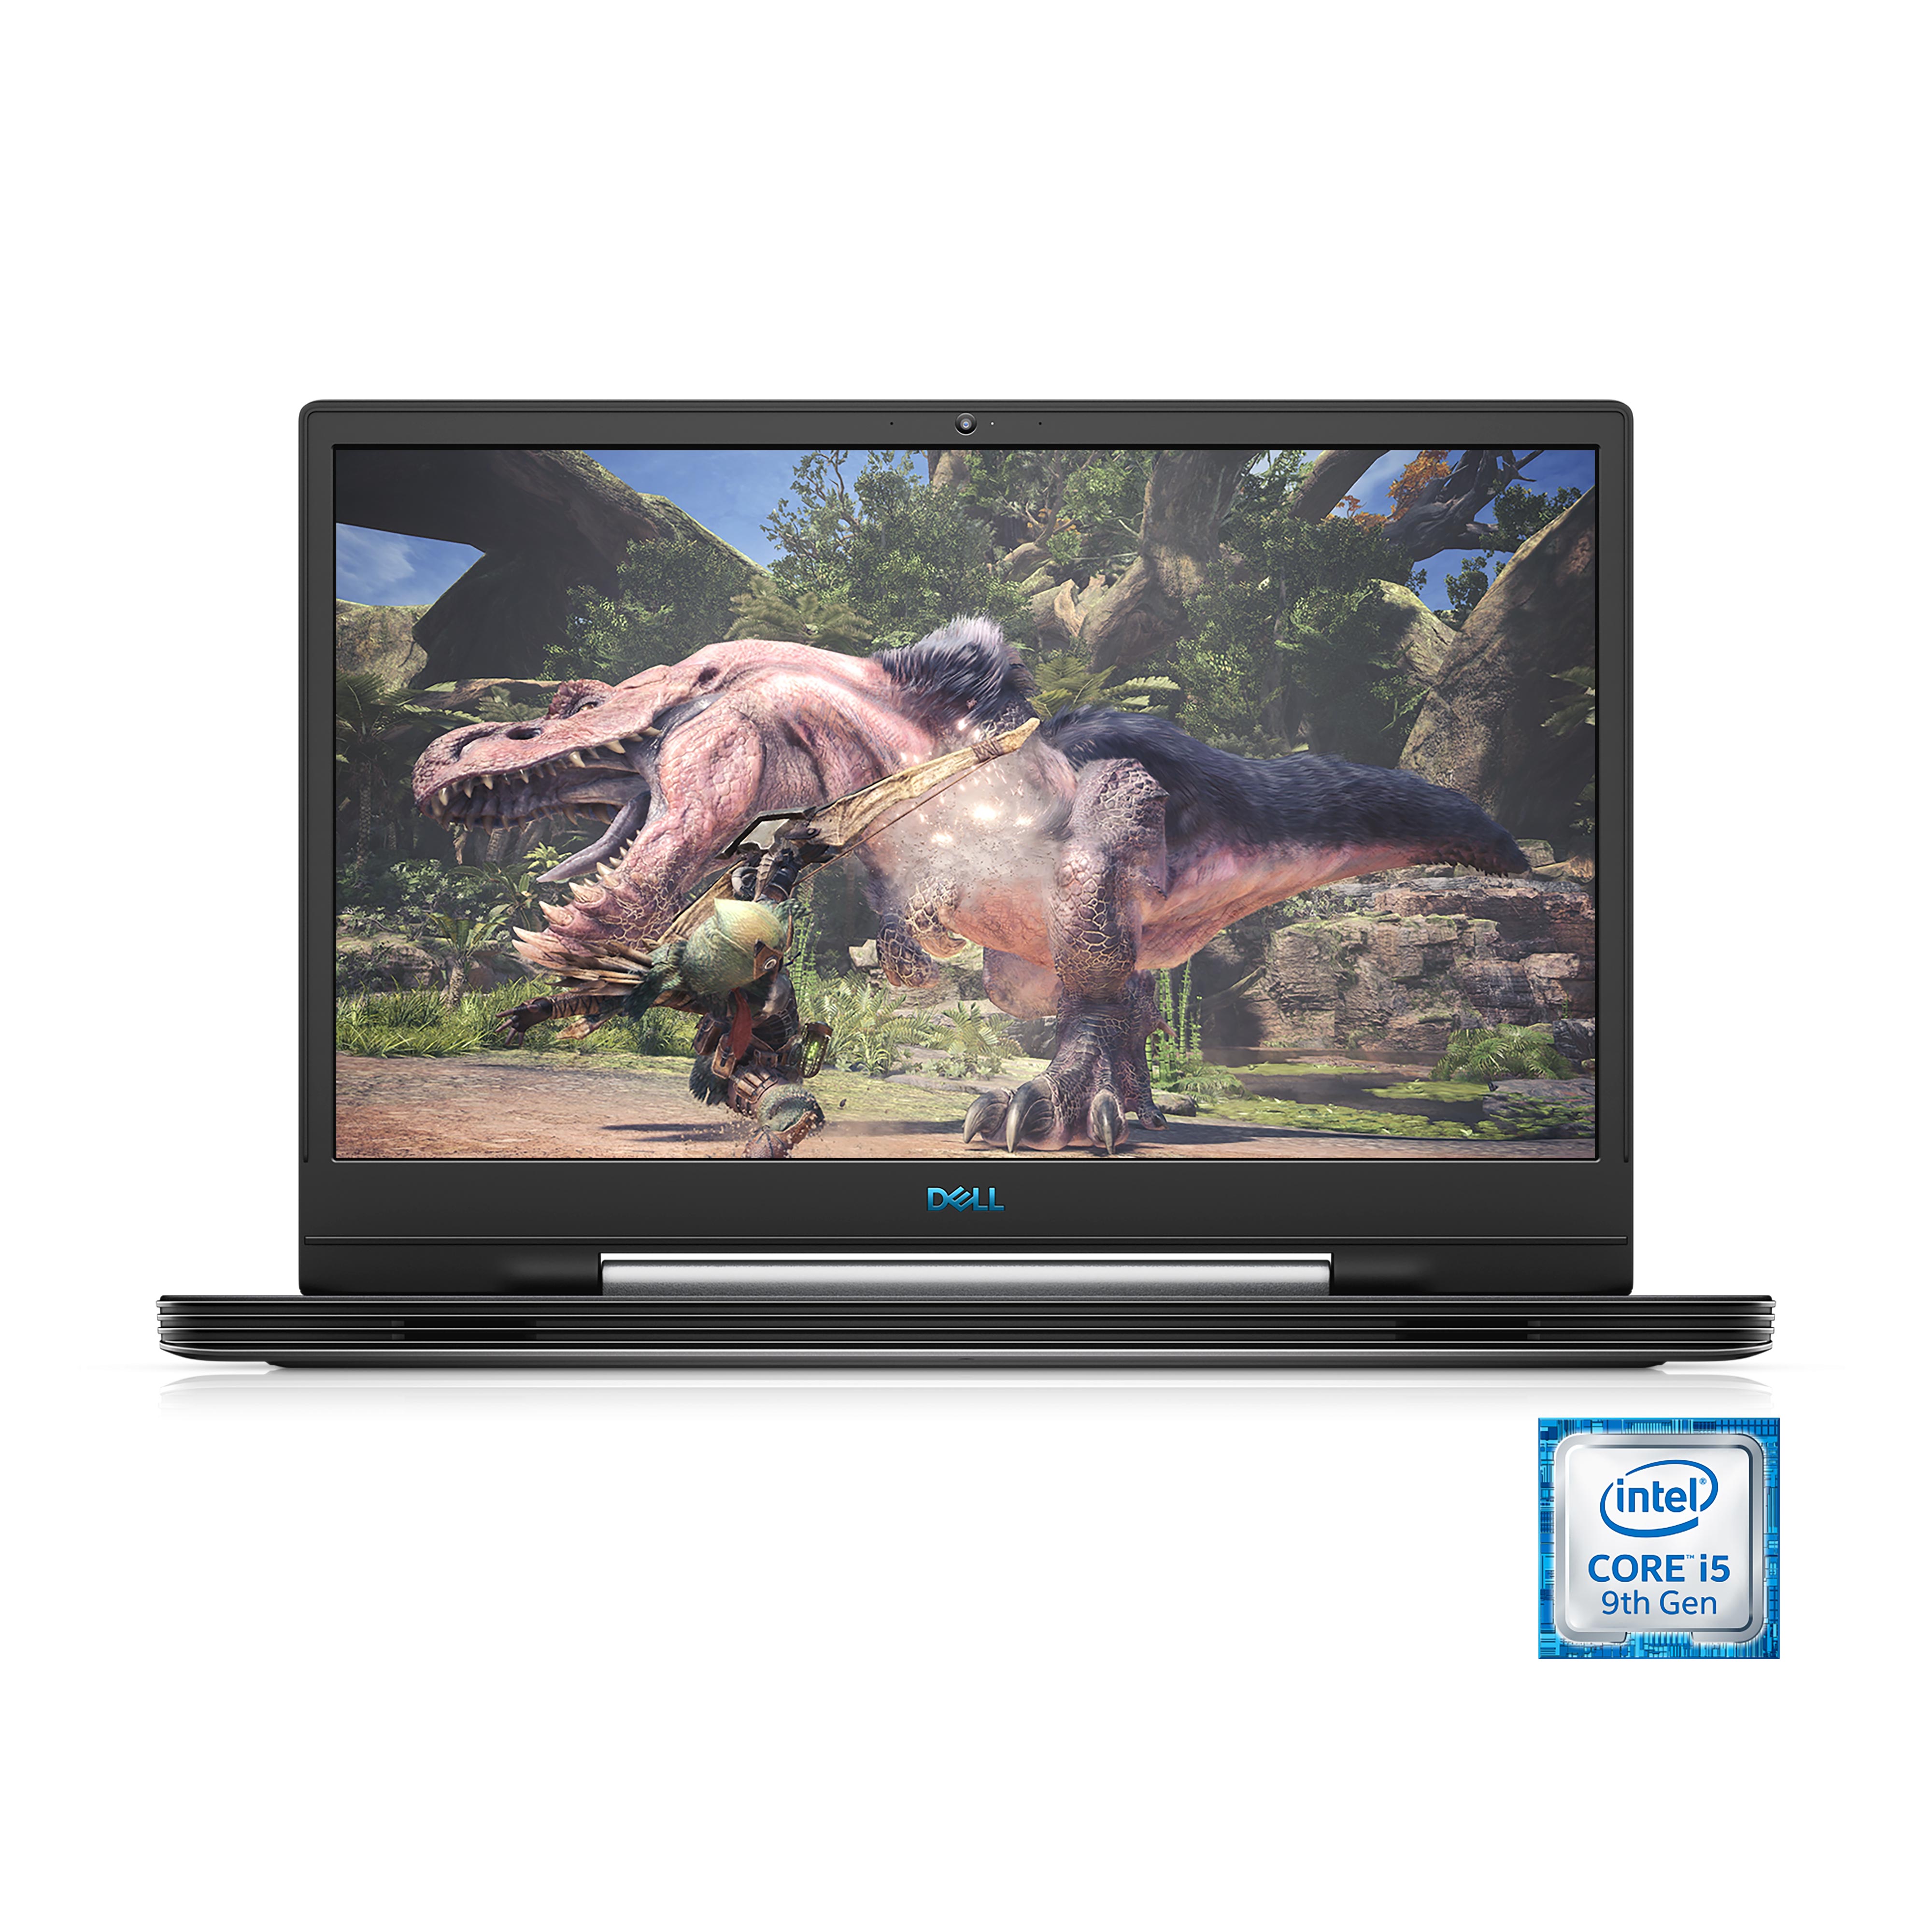 Dell G7 17 7790 Gaming Laptop, 17.3'' FHD, Intel Core i5-9300H, NVIDIA GeForce RTX 2060, 8GB RAM, 128 GB SSD + 1TB HDD, Windows 10 Home, G7790-5695GRY-PUS (Google Classroom Compatible) - image 1 of 16